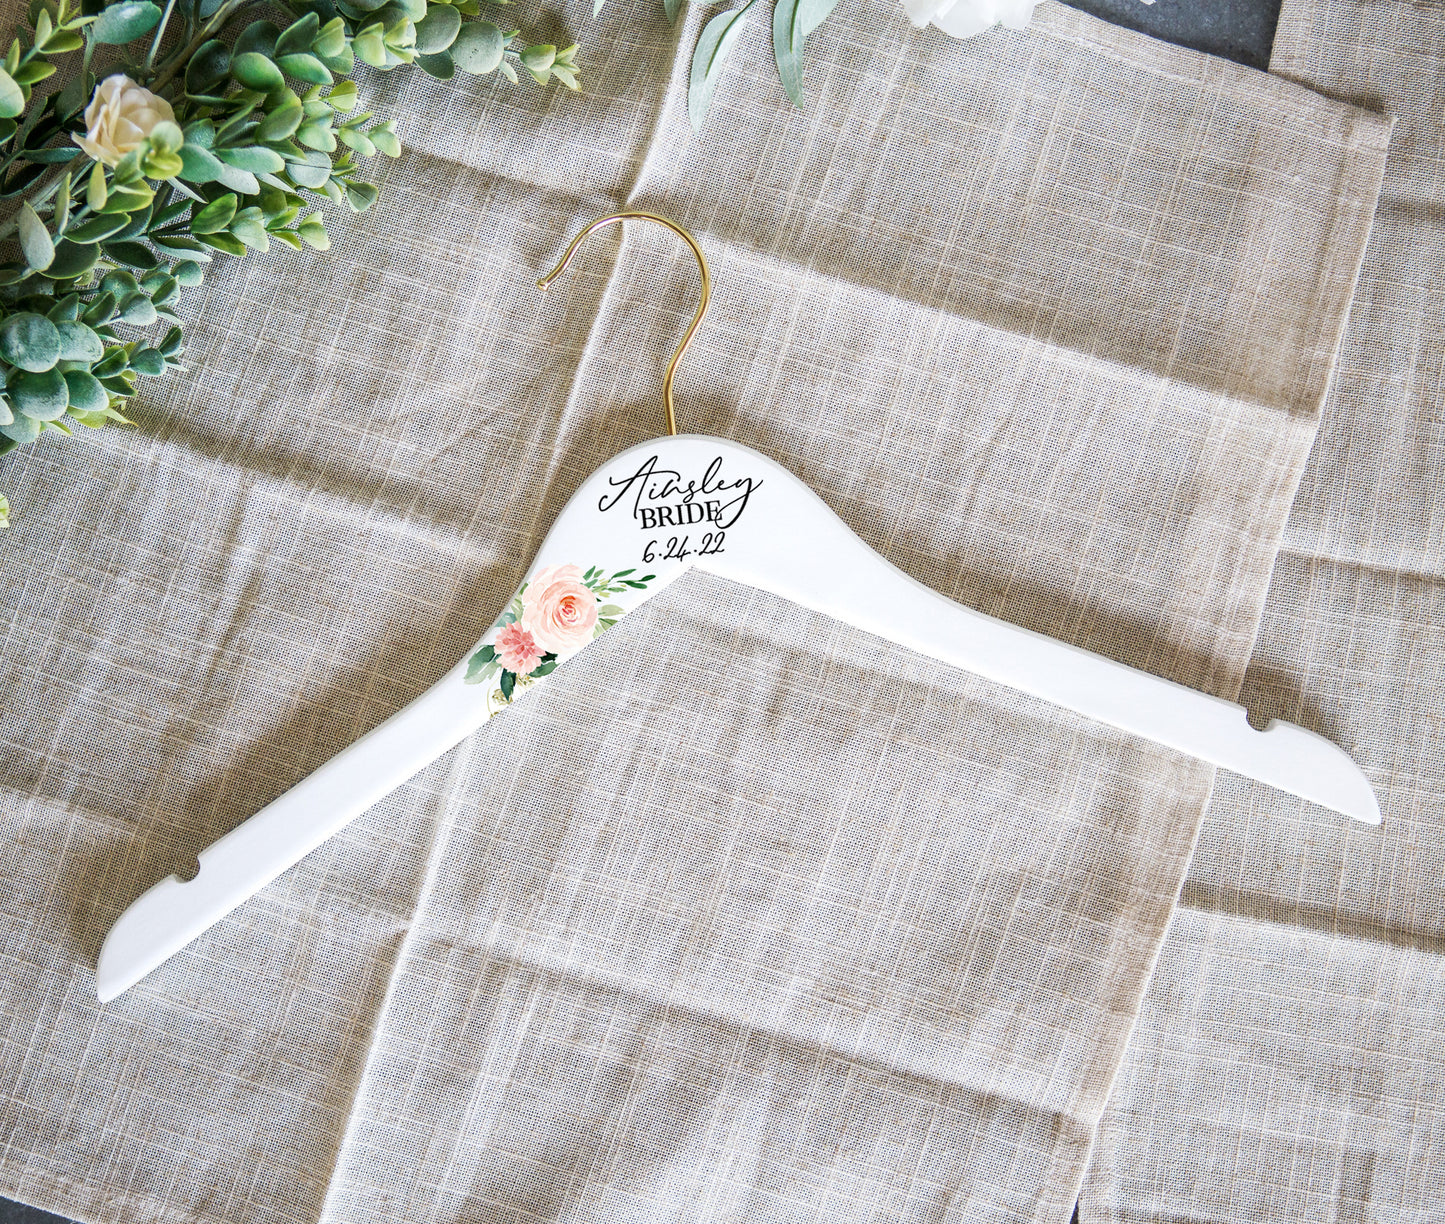 Wedding Hangers with Names and Titles - Wedding Decor Gifts